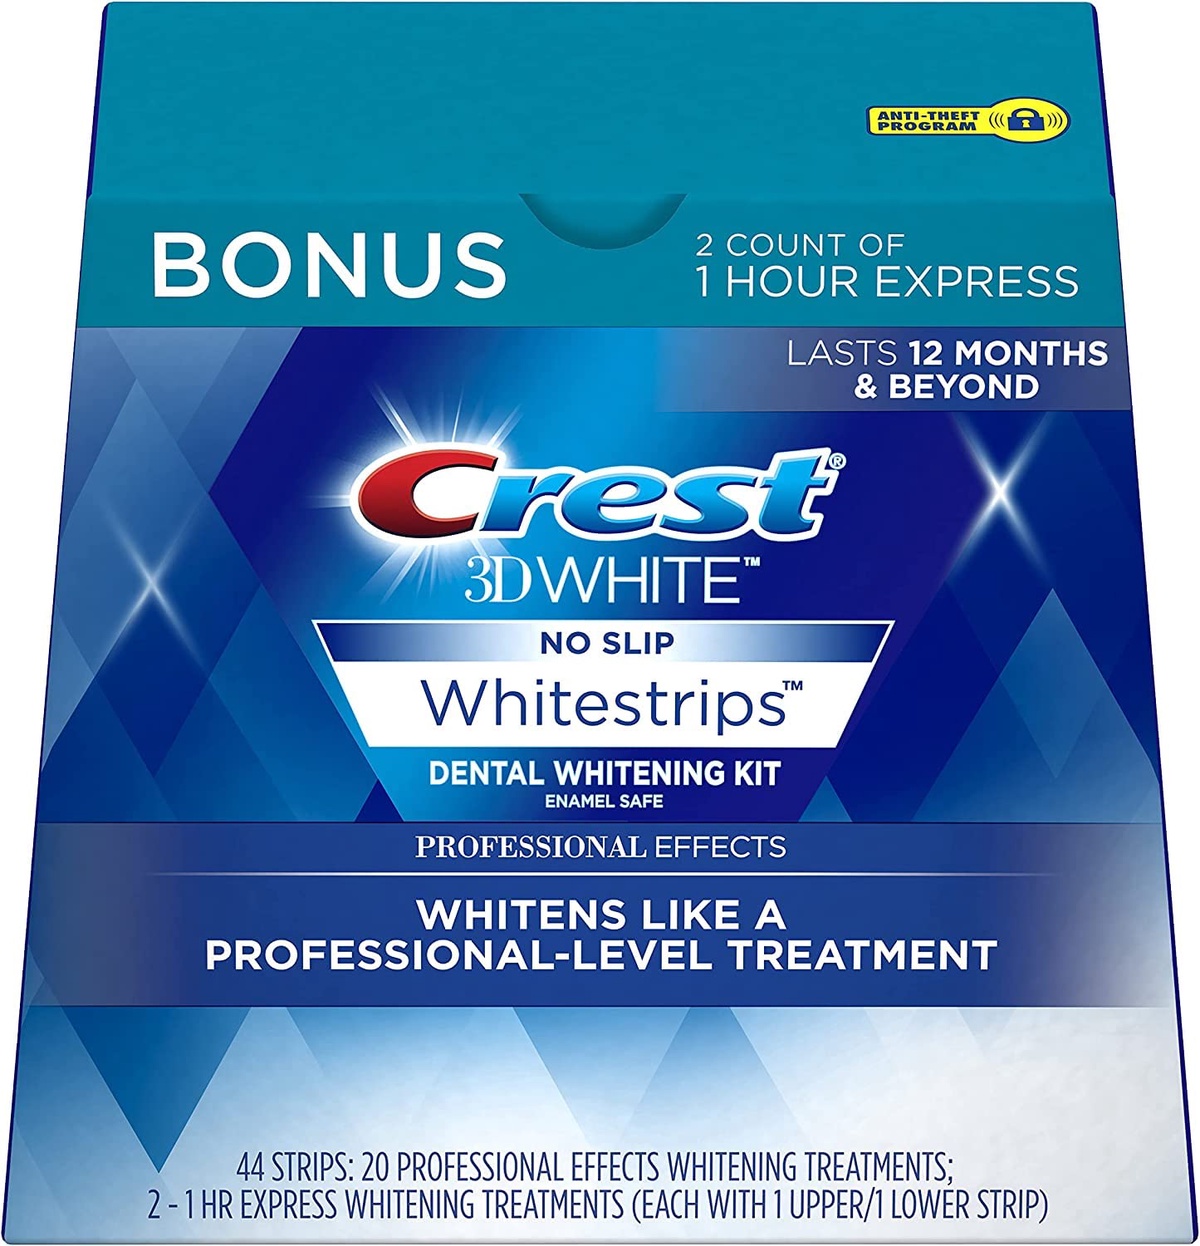 Unlock Your Brightest Smile with Crest 3D White Whitestrips!